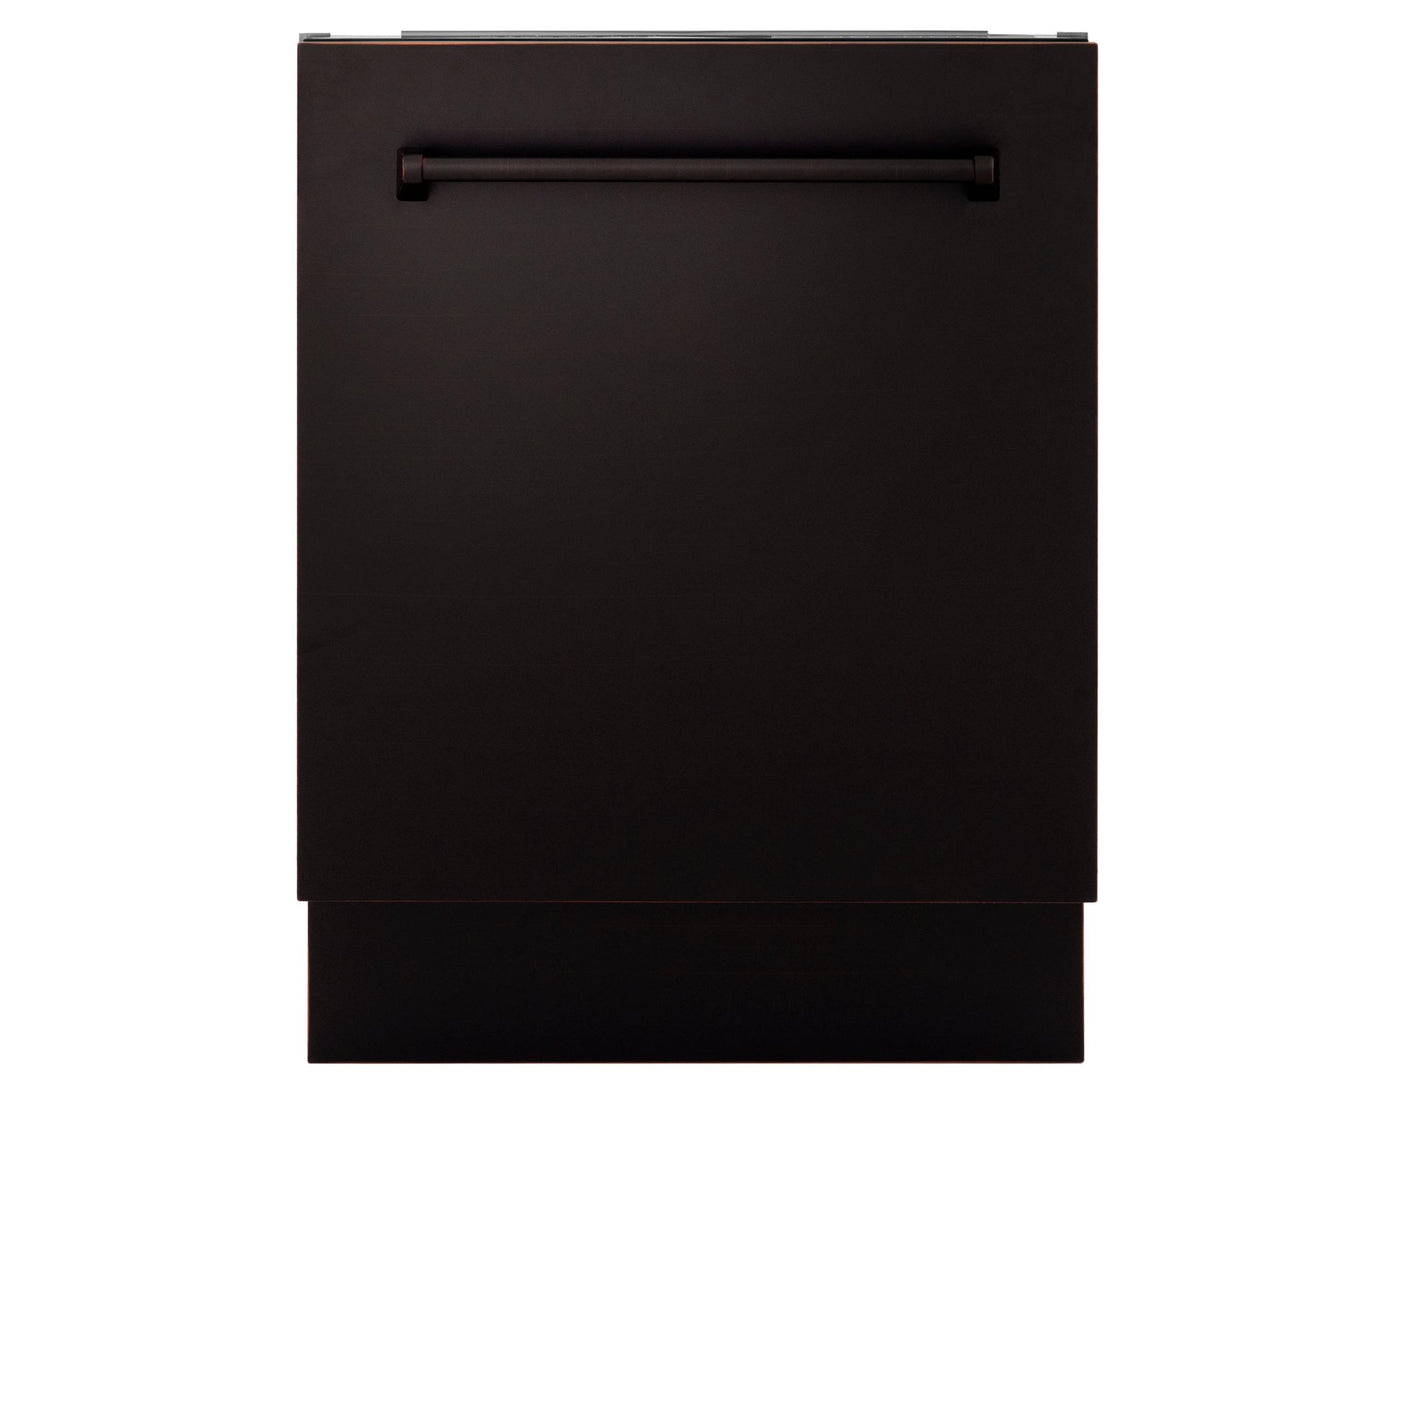 ZLINE 24" Tallac Series 3rd Rack Dishwasher with Traditional Handle, 51dBa (DWV-24) [Color: Oil Rubbed Bronze]